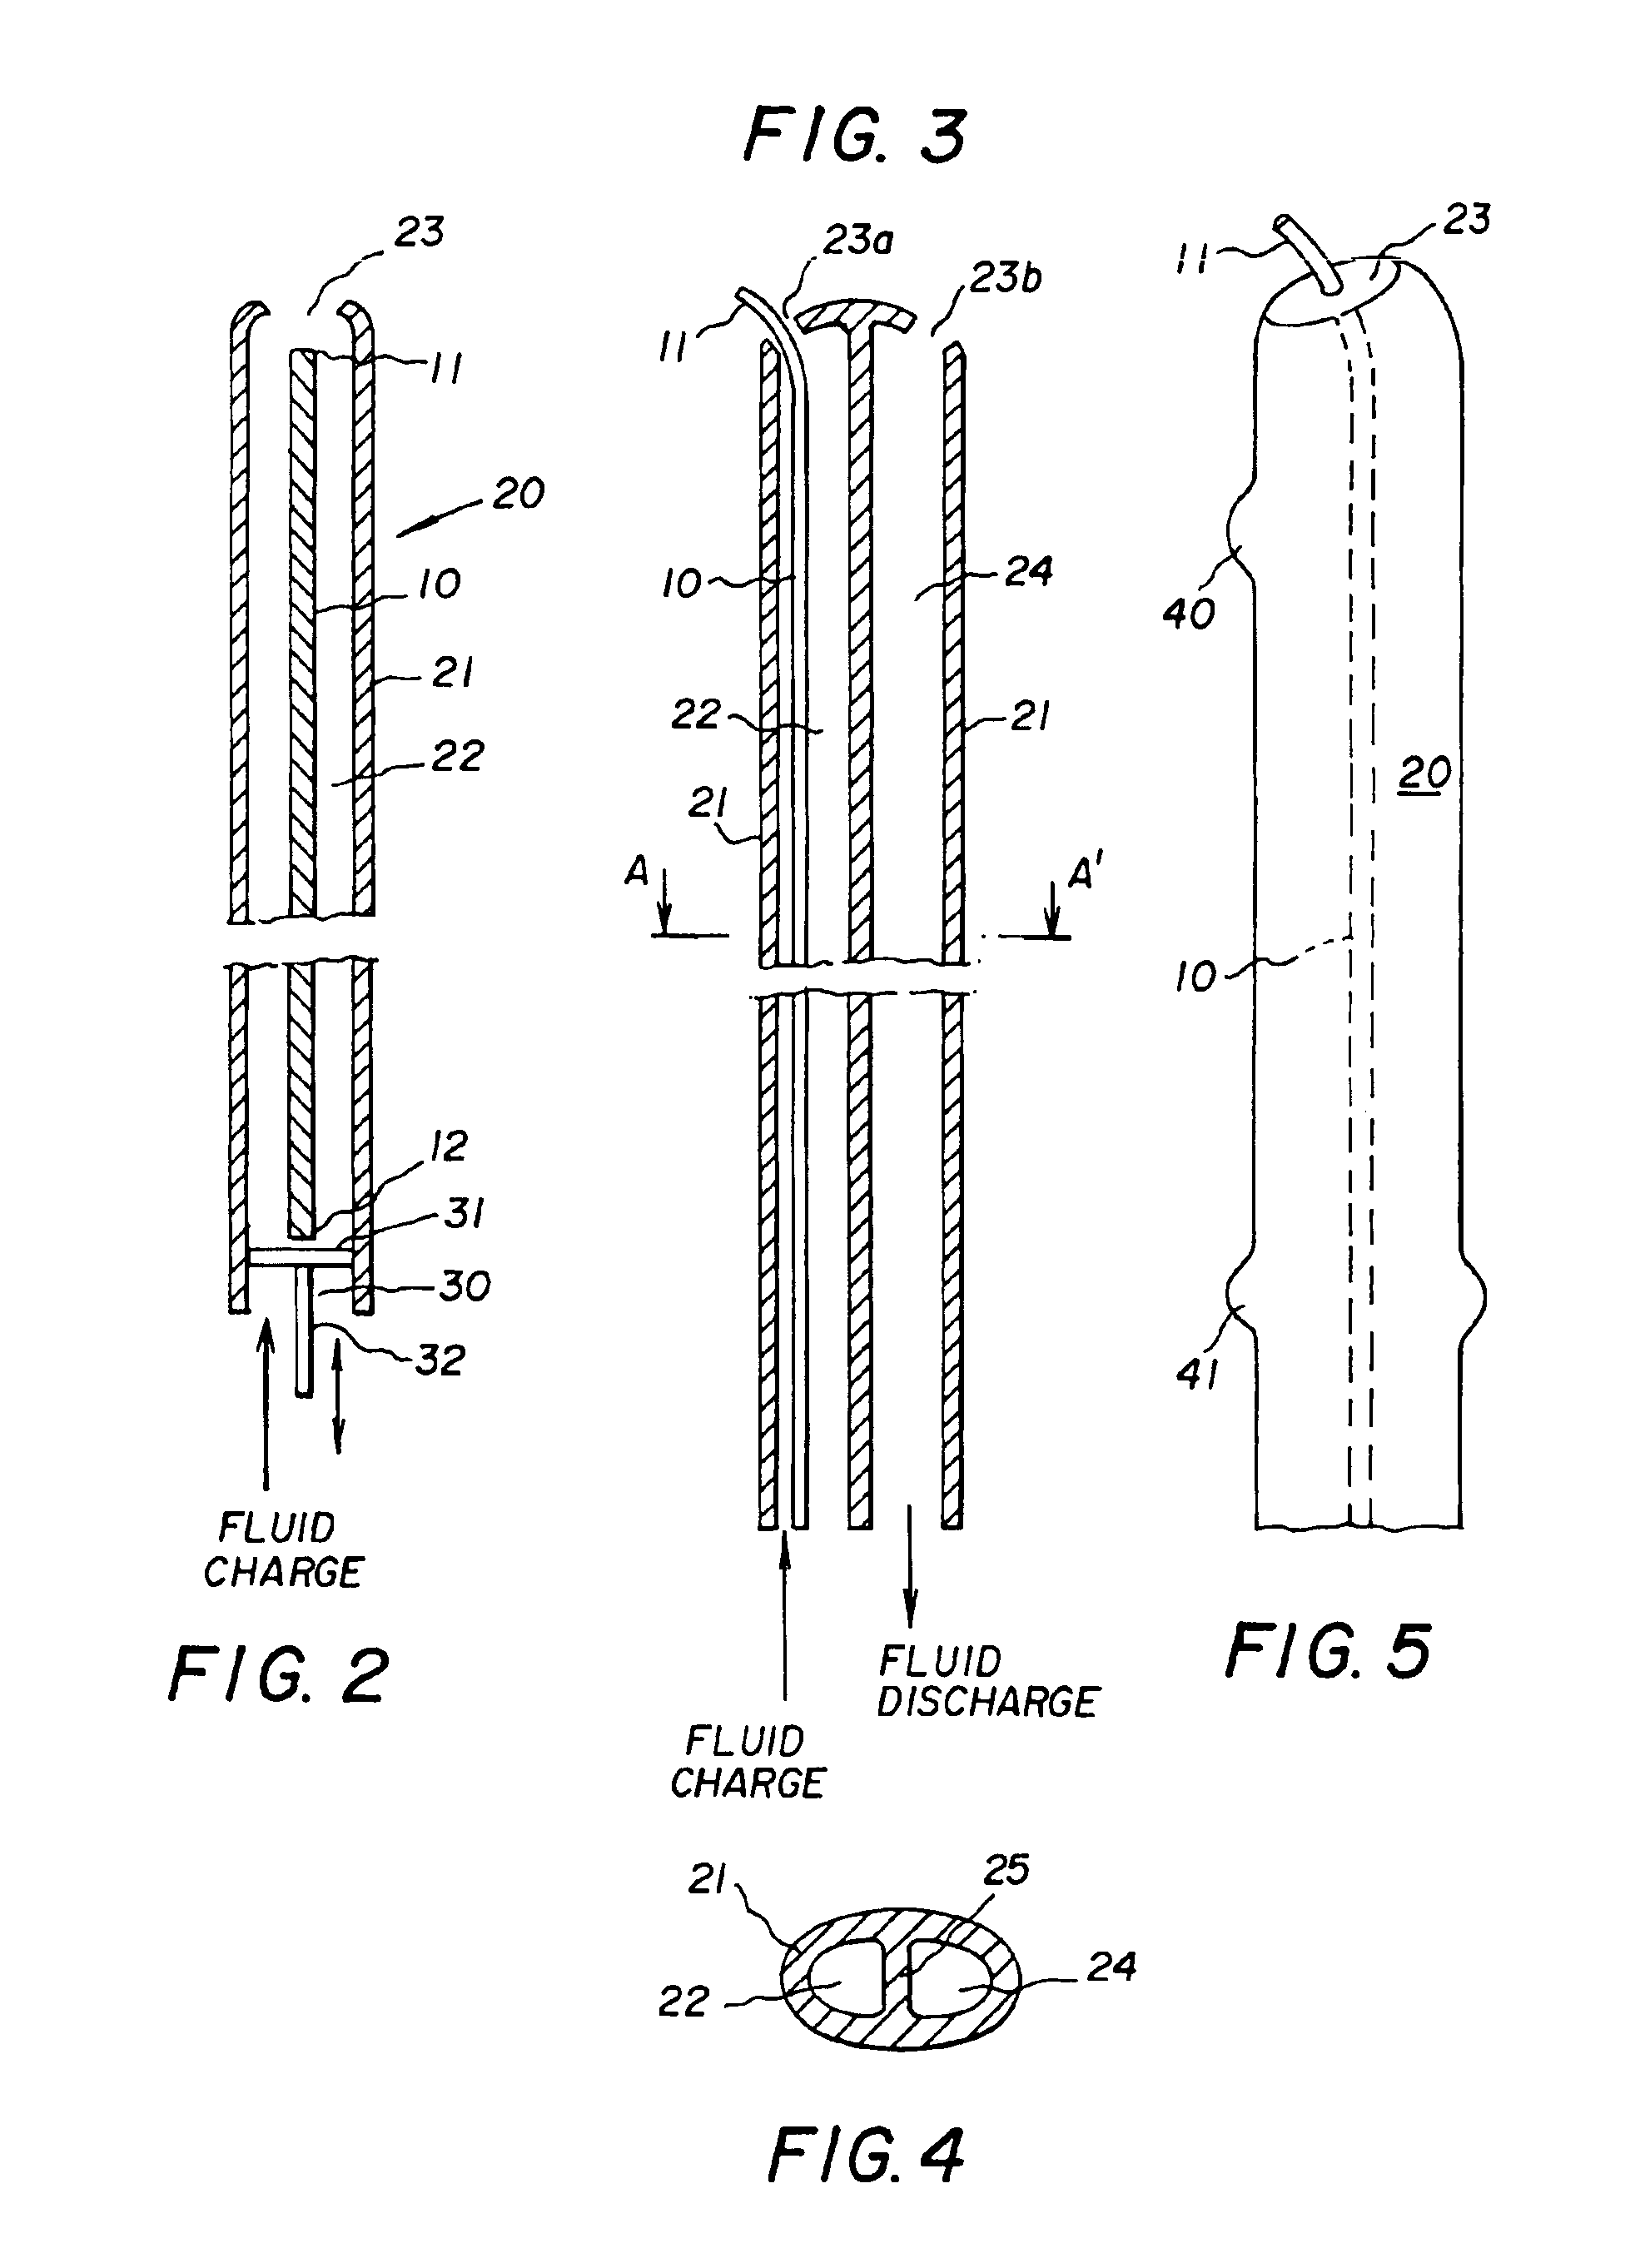 Method and device for use in micturition studies